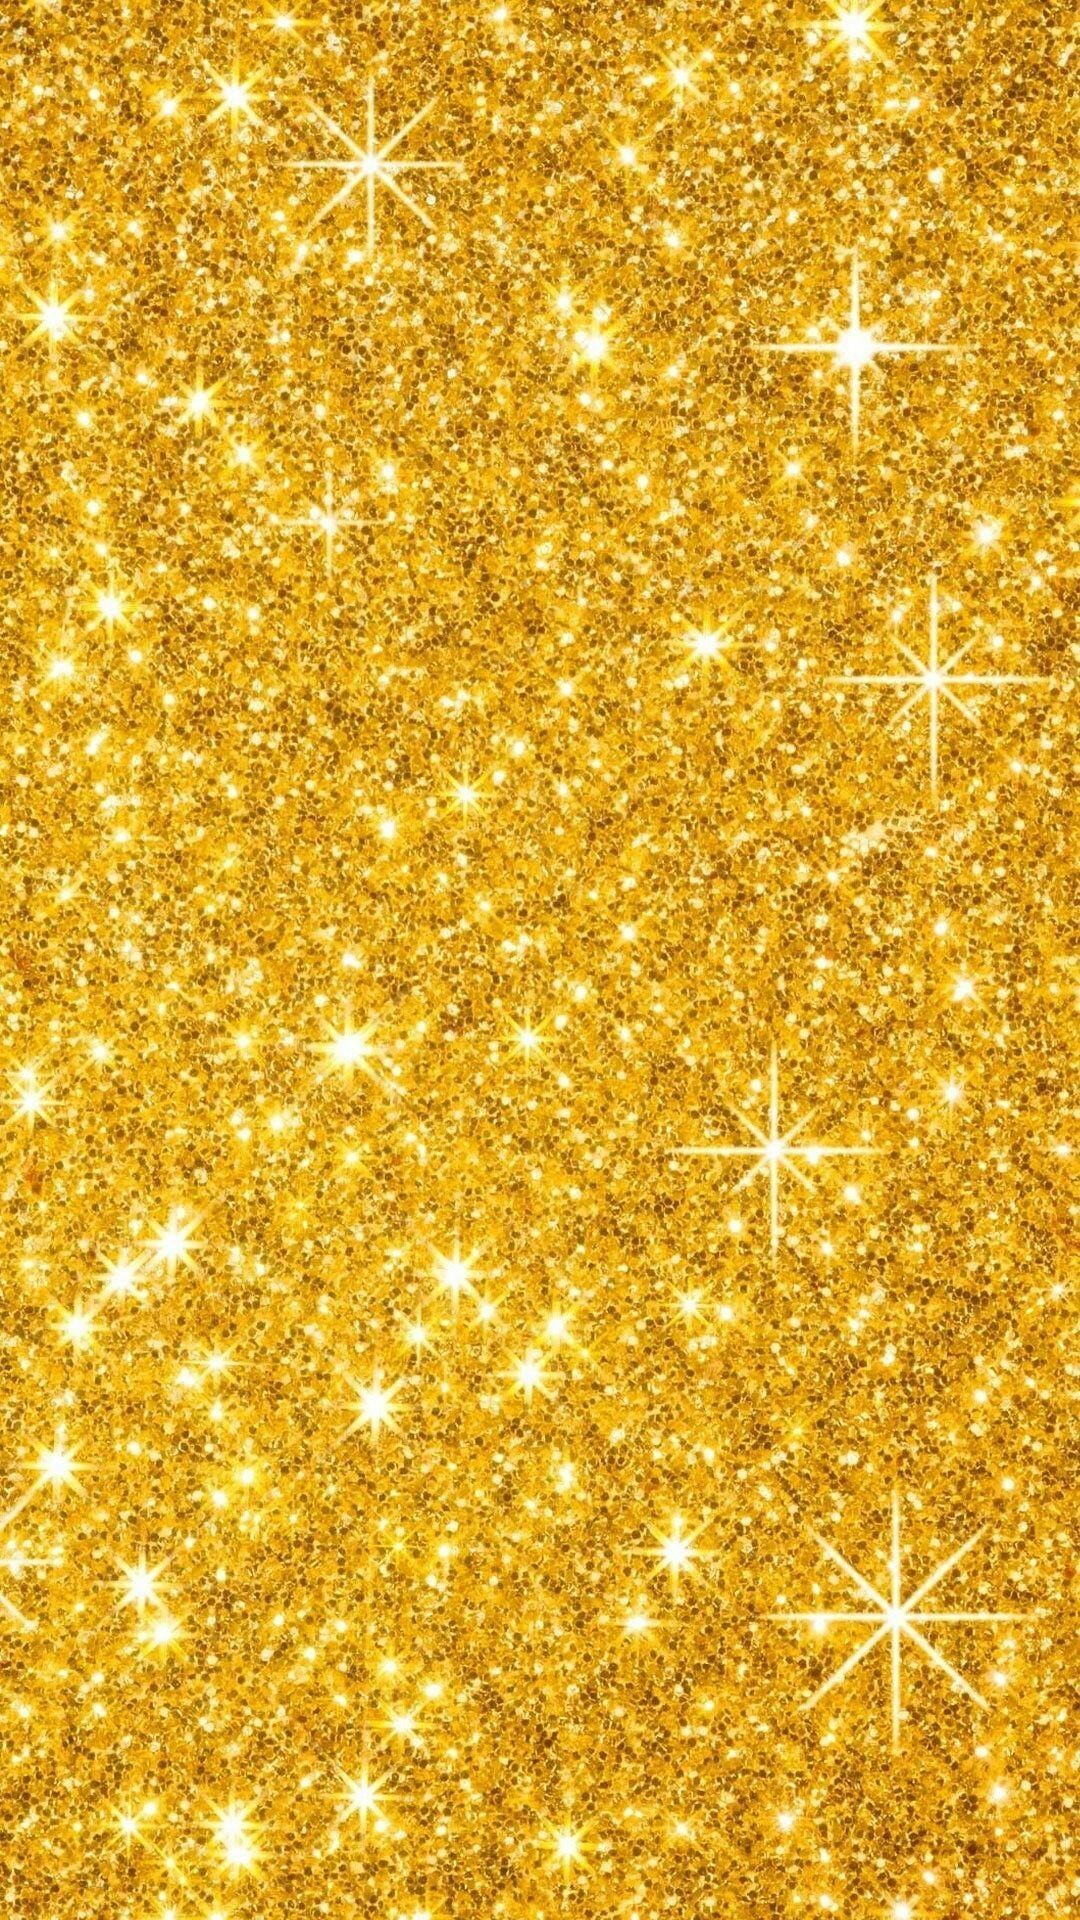 Sparkle: Yellow glitter, Used on optically variable inks. 1080x1920 Full HD Background.